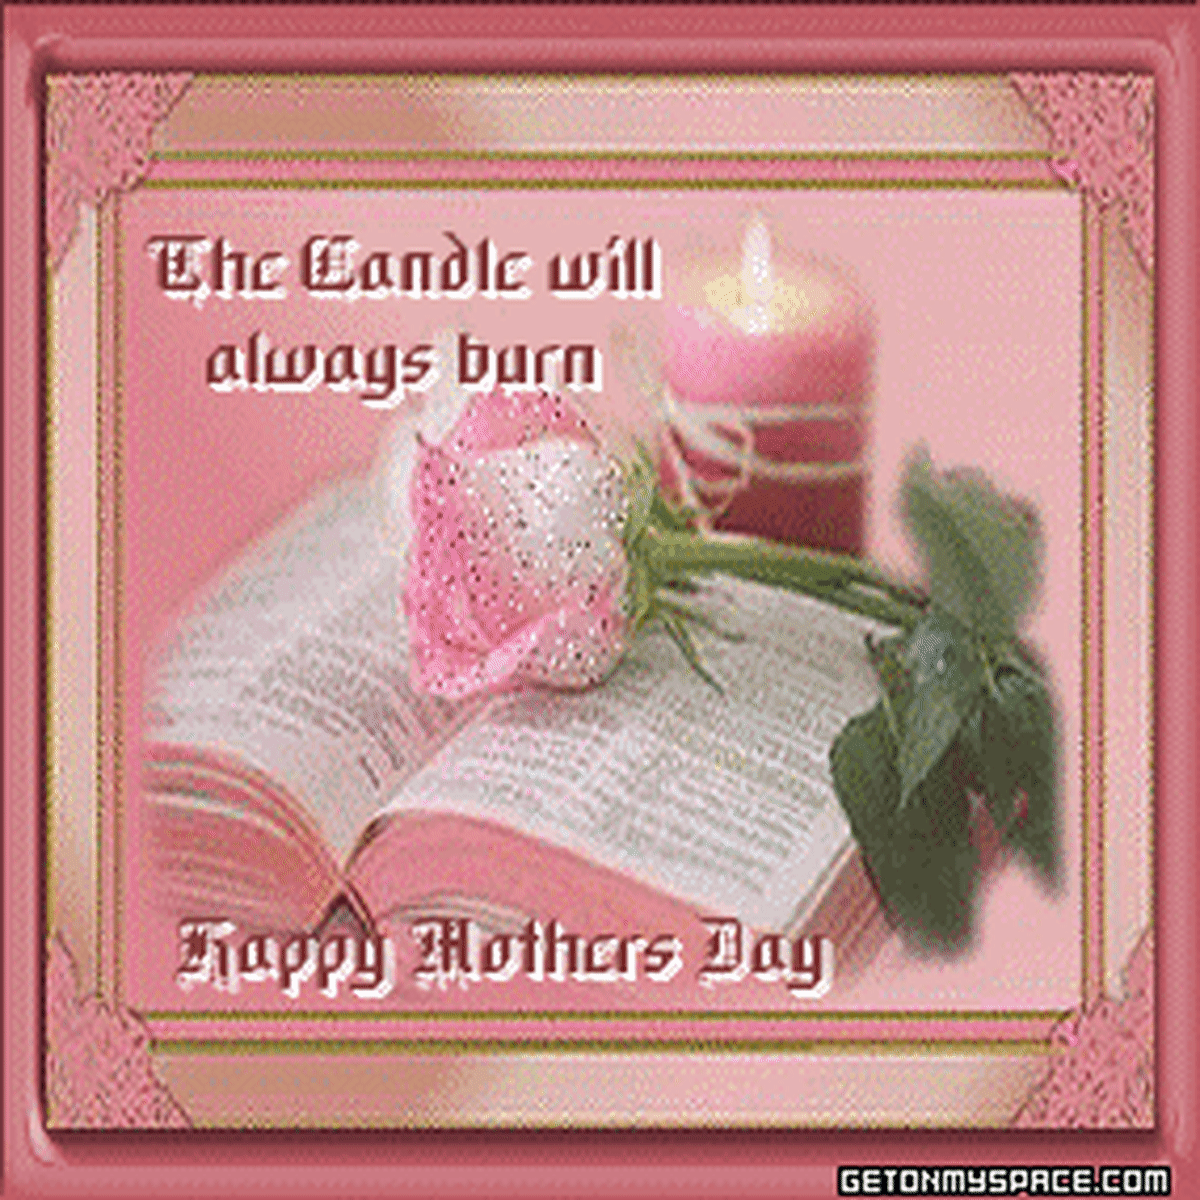 http://media.photobucket.com/image/%20the%20candle%20that%20always%20burns/geton2/Mothers_Day_Comments/candle-will-always-burn.gif